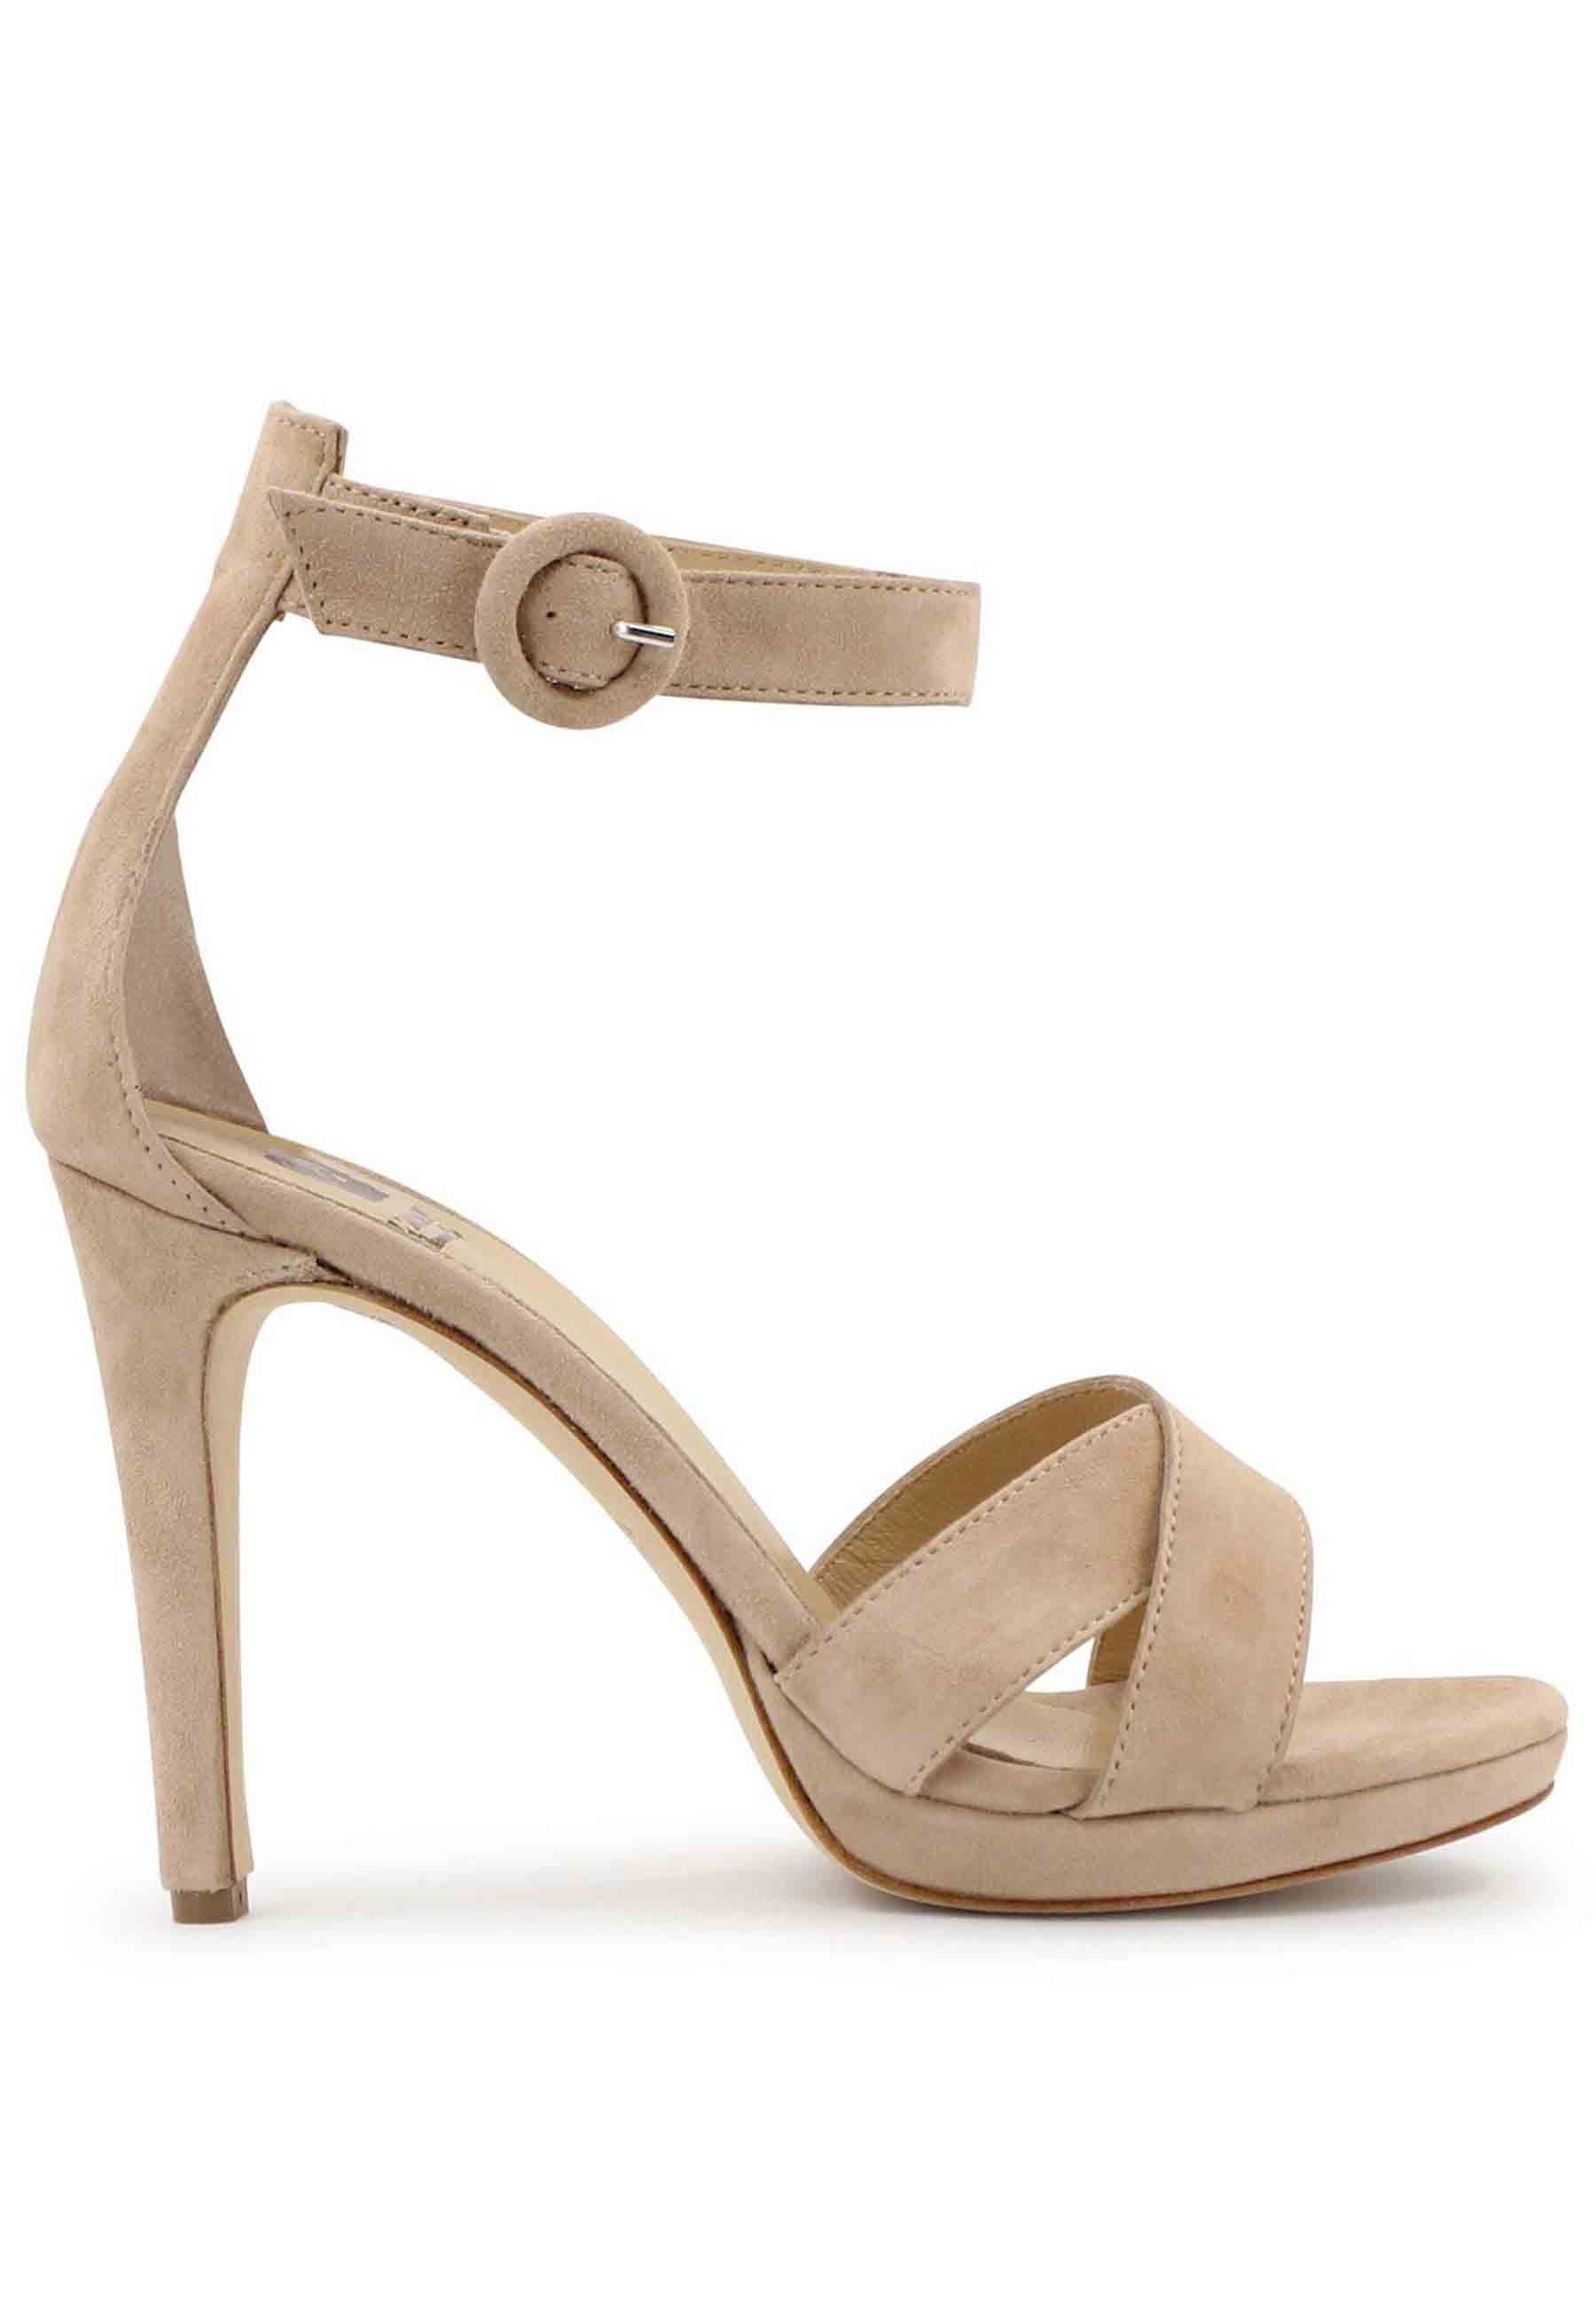 Women's nude suede sandals with high heel and ankle strap